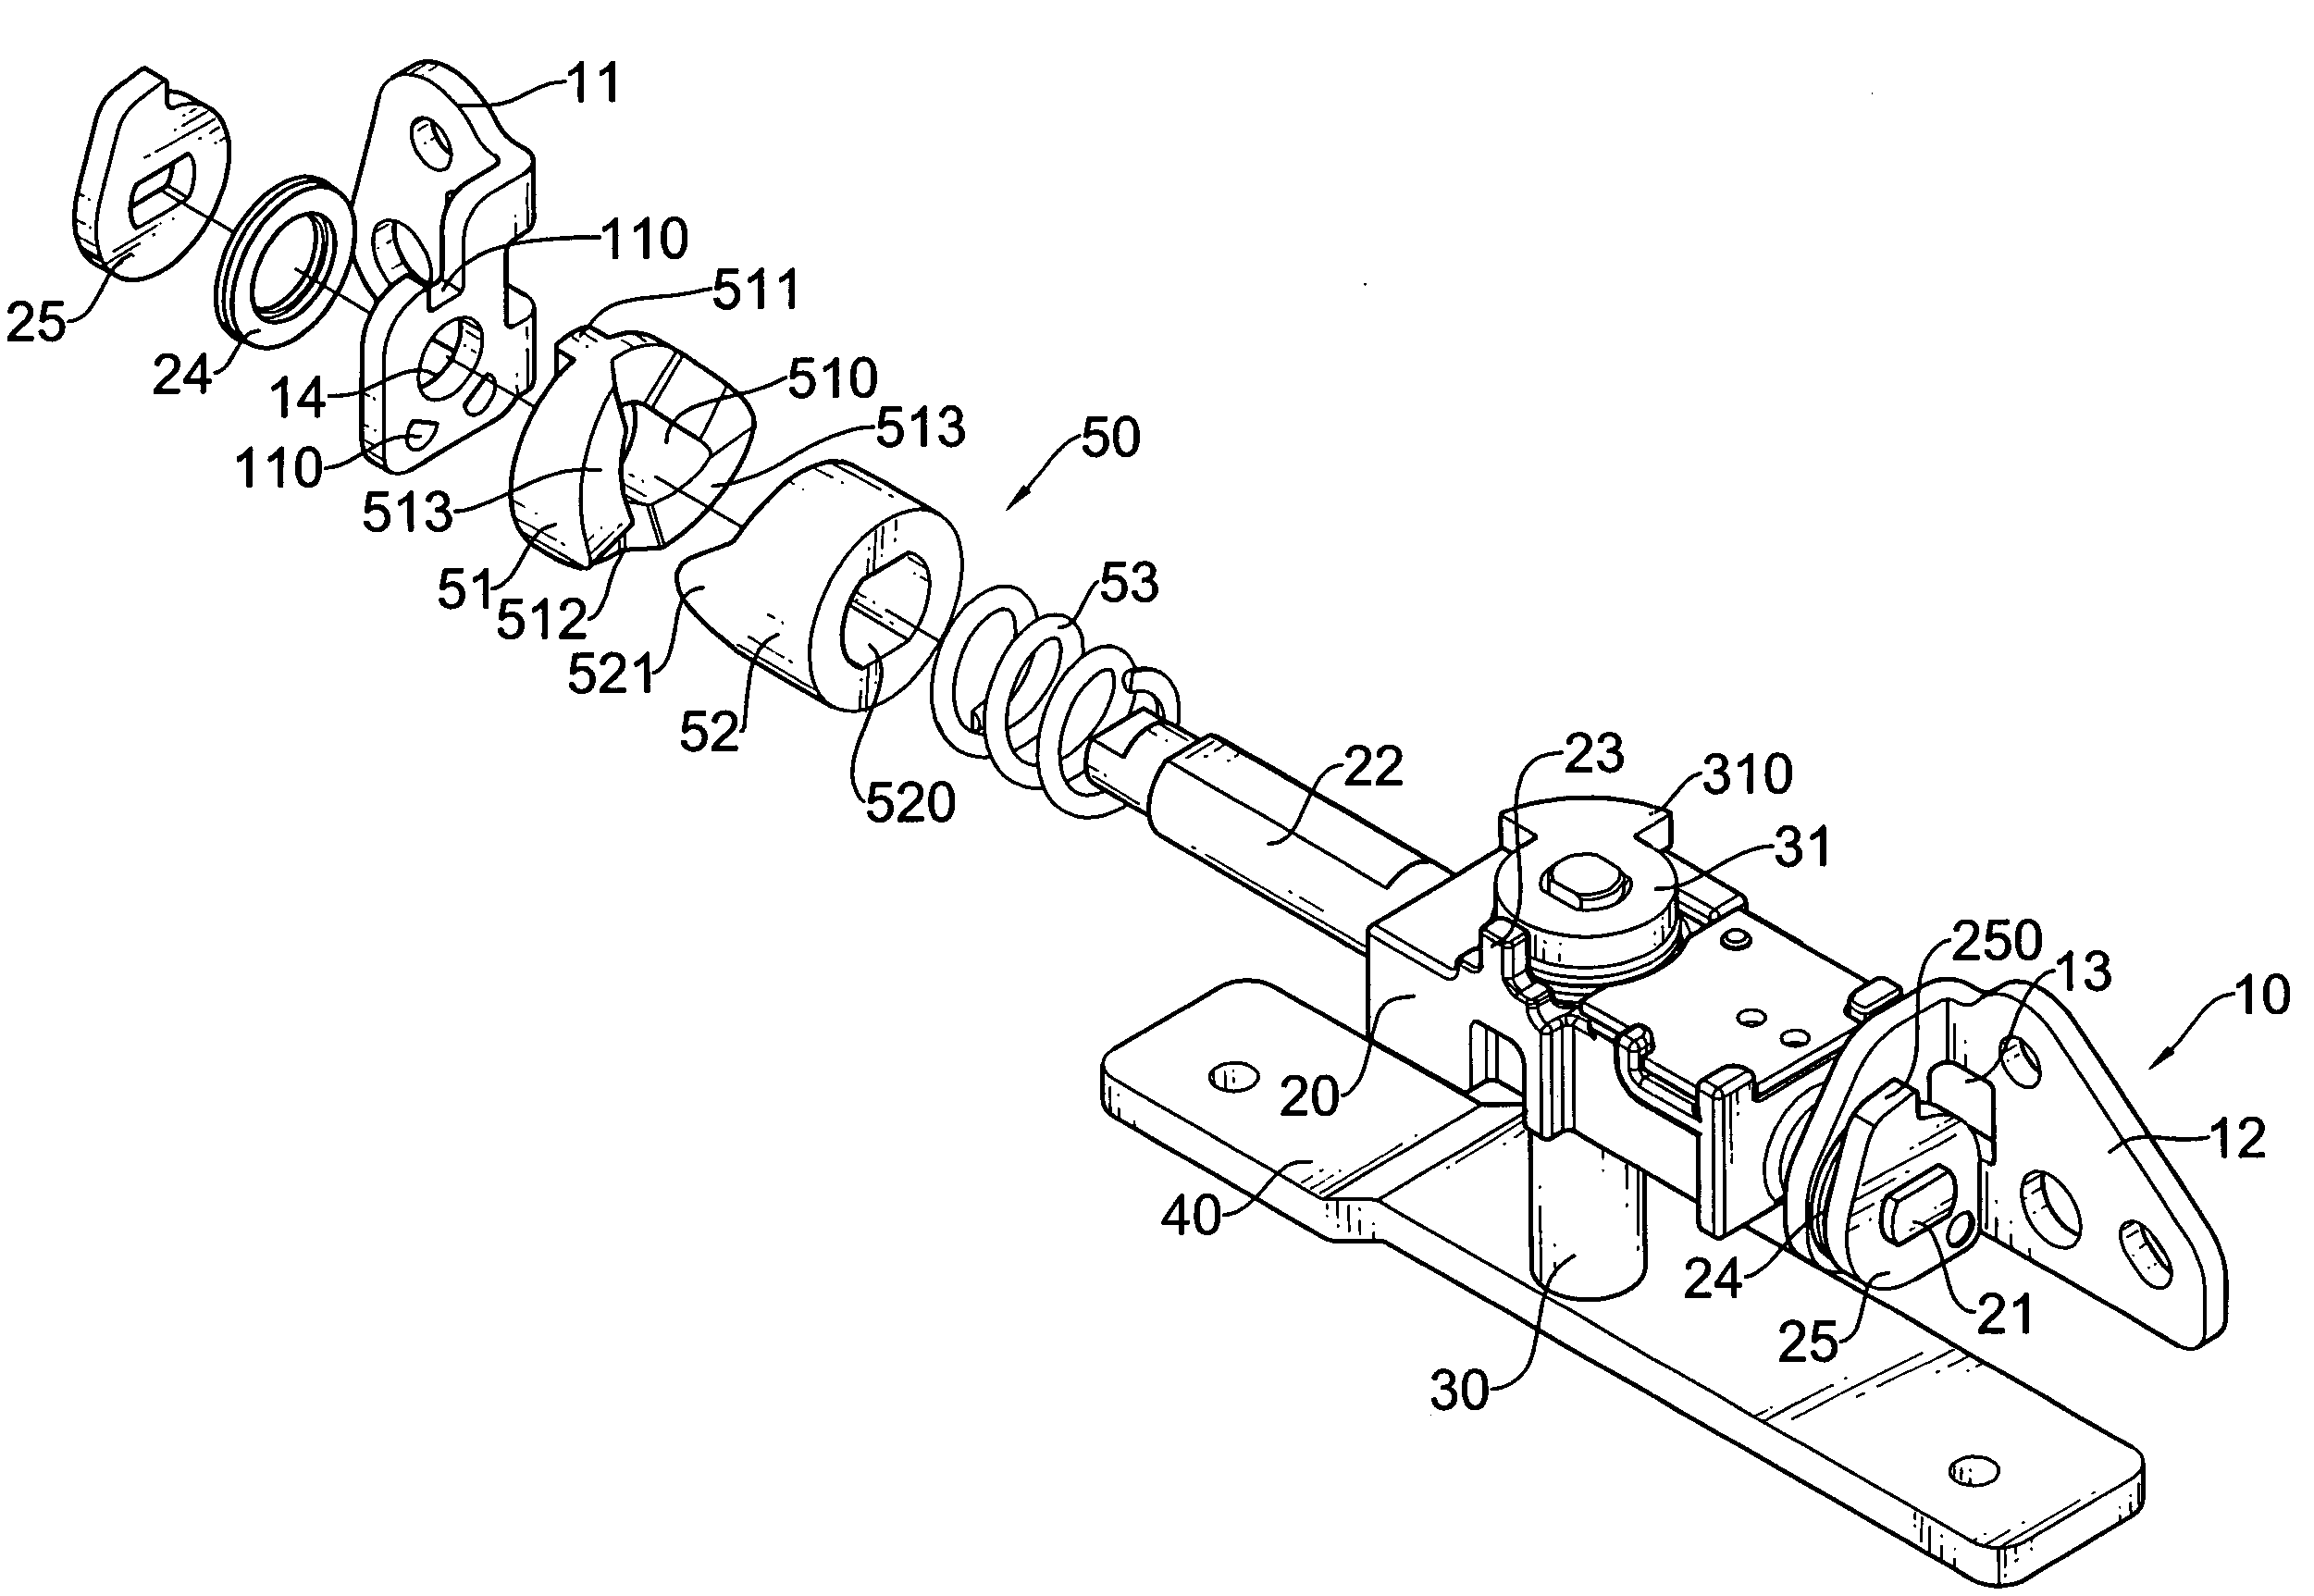 Automated hinge assembly